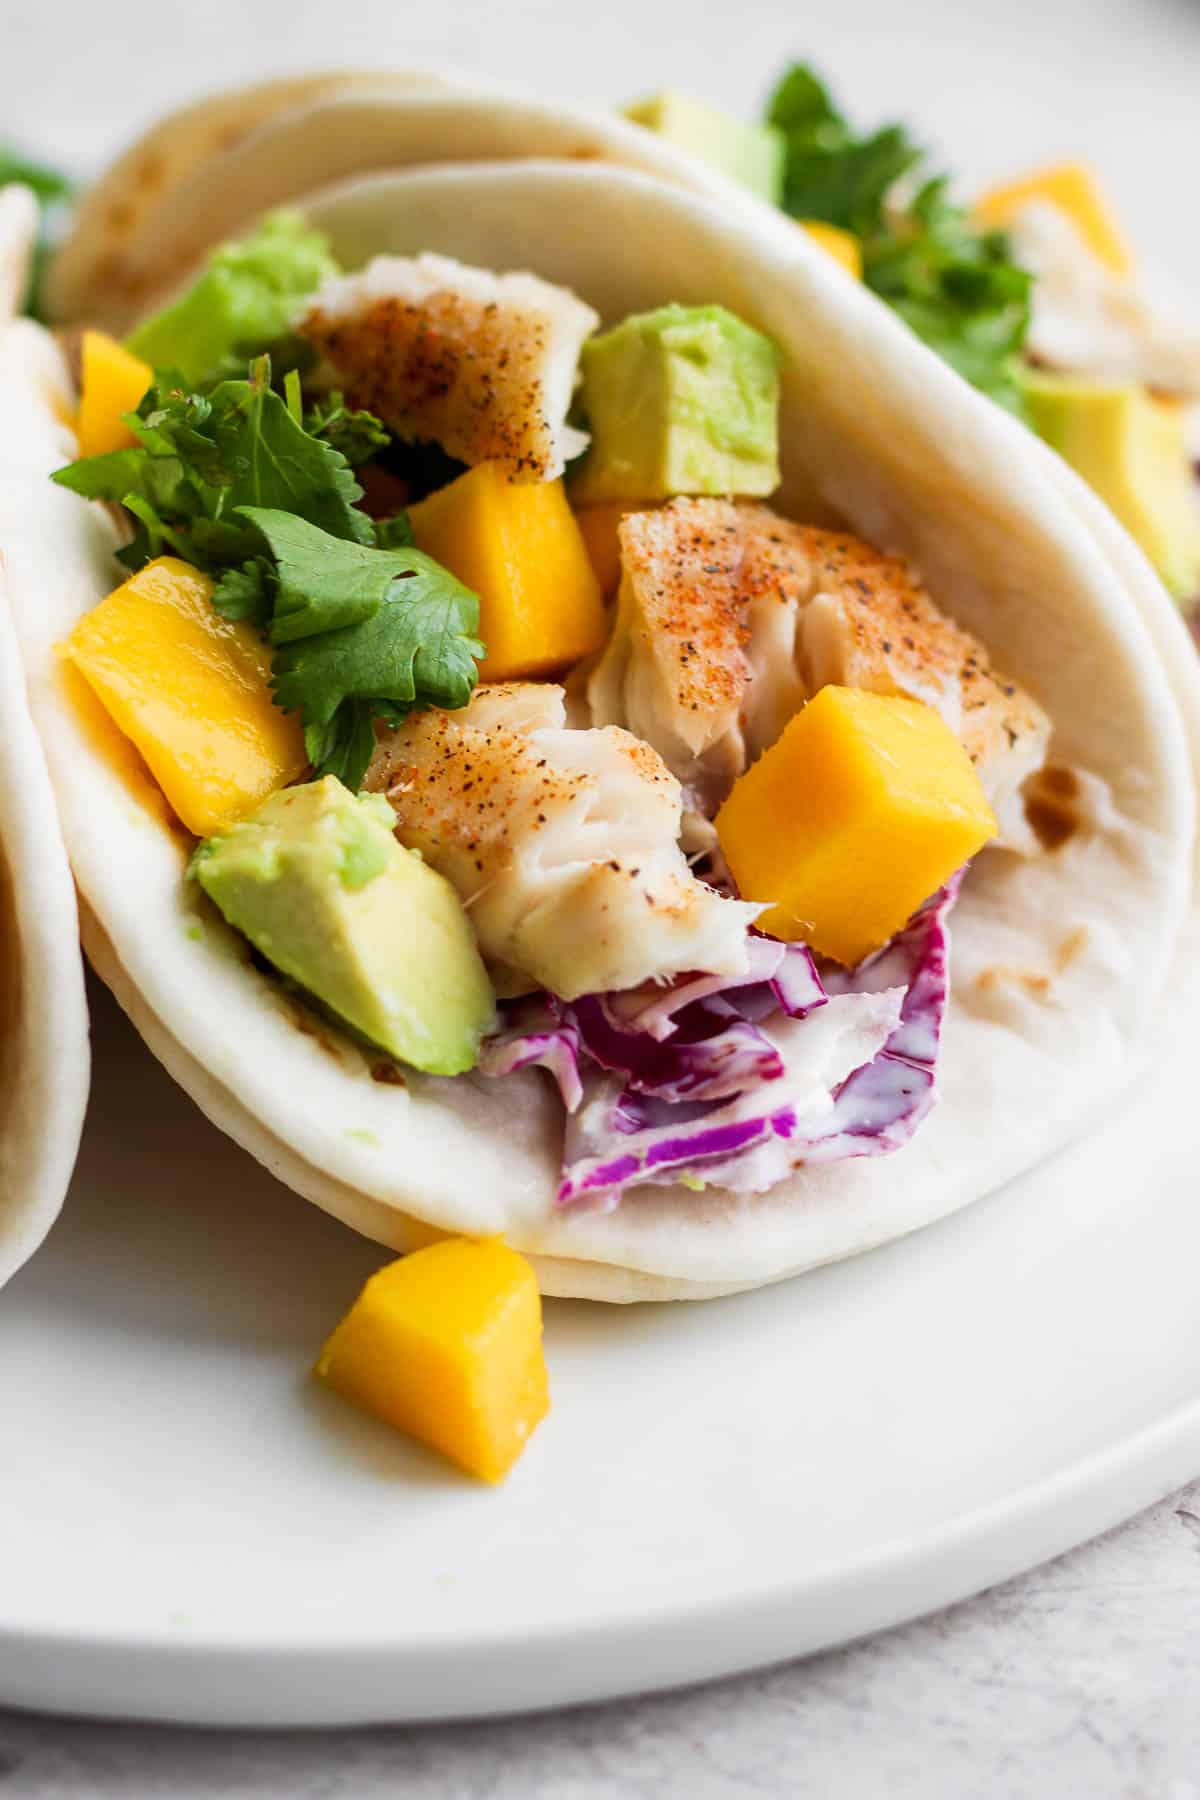 Baked tilapia in a fish taco.